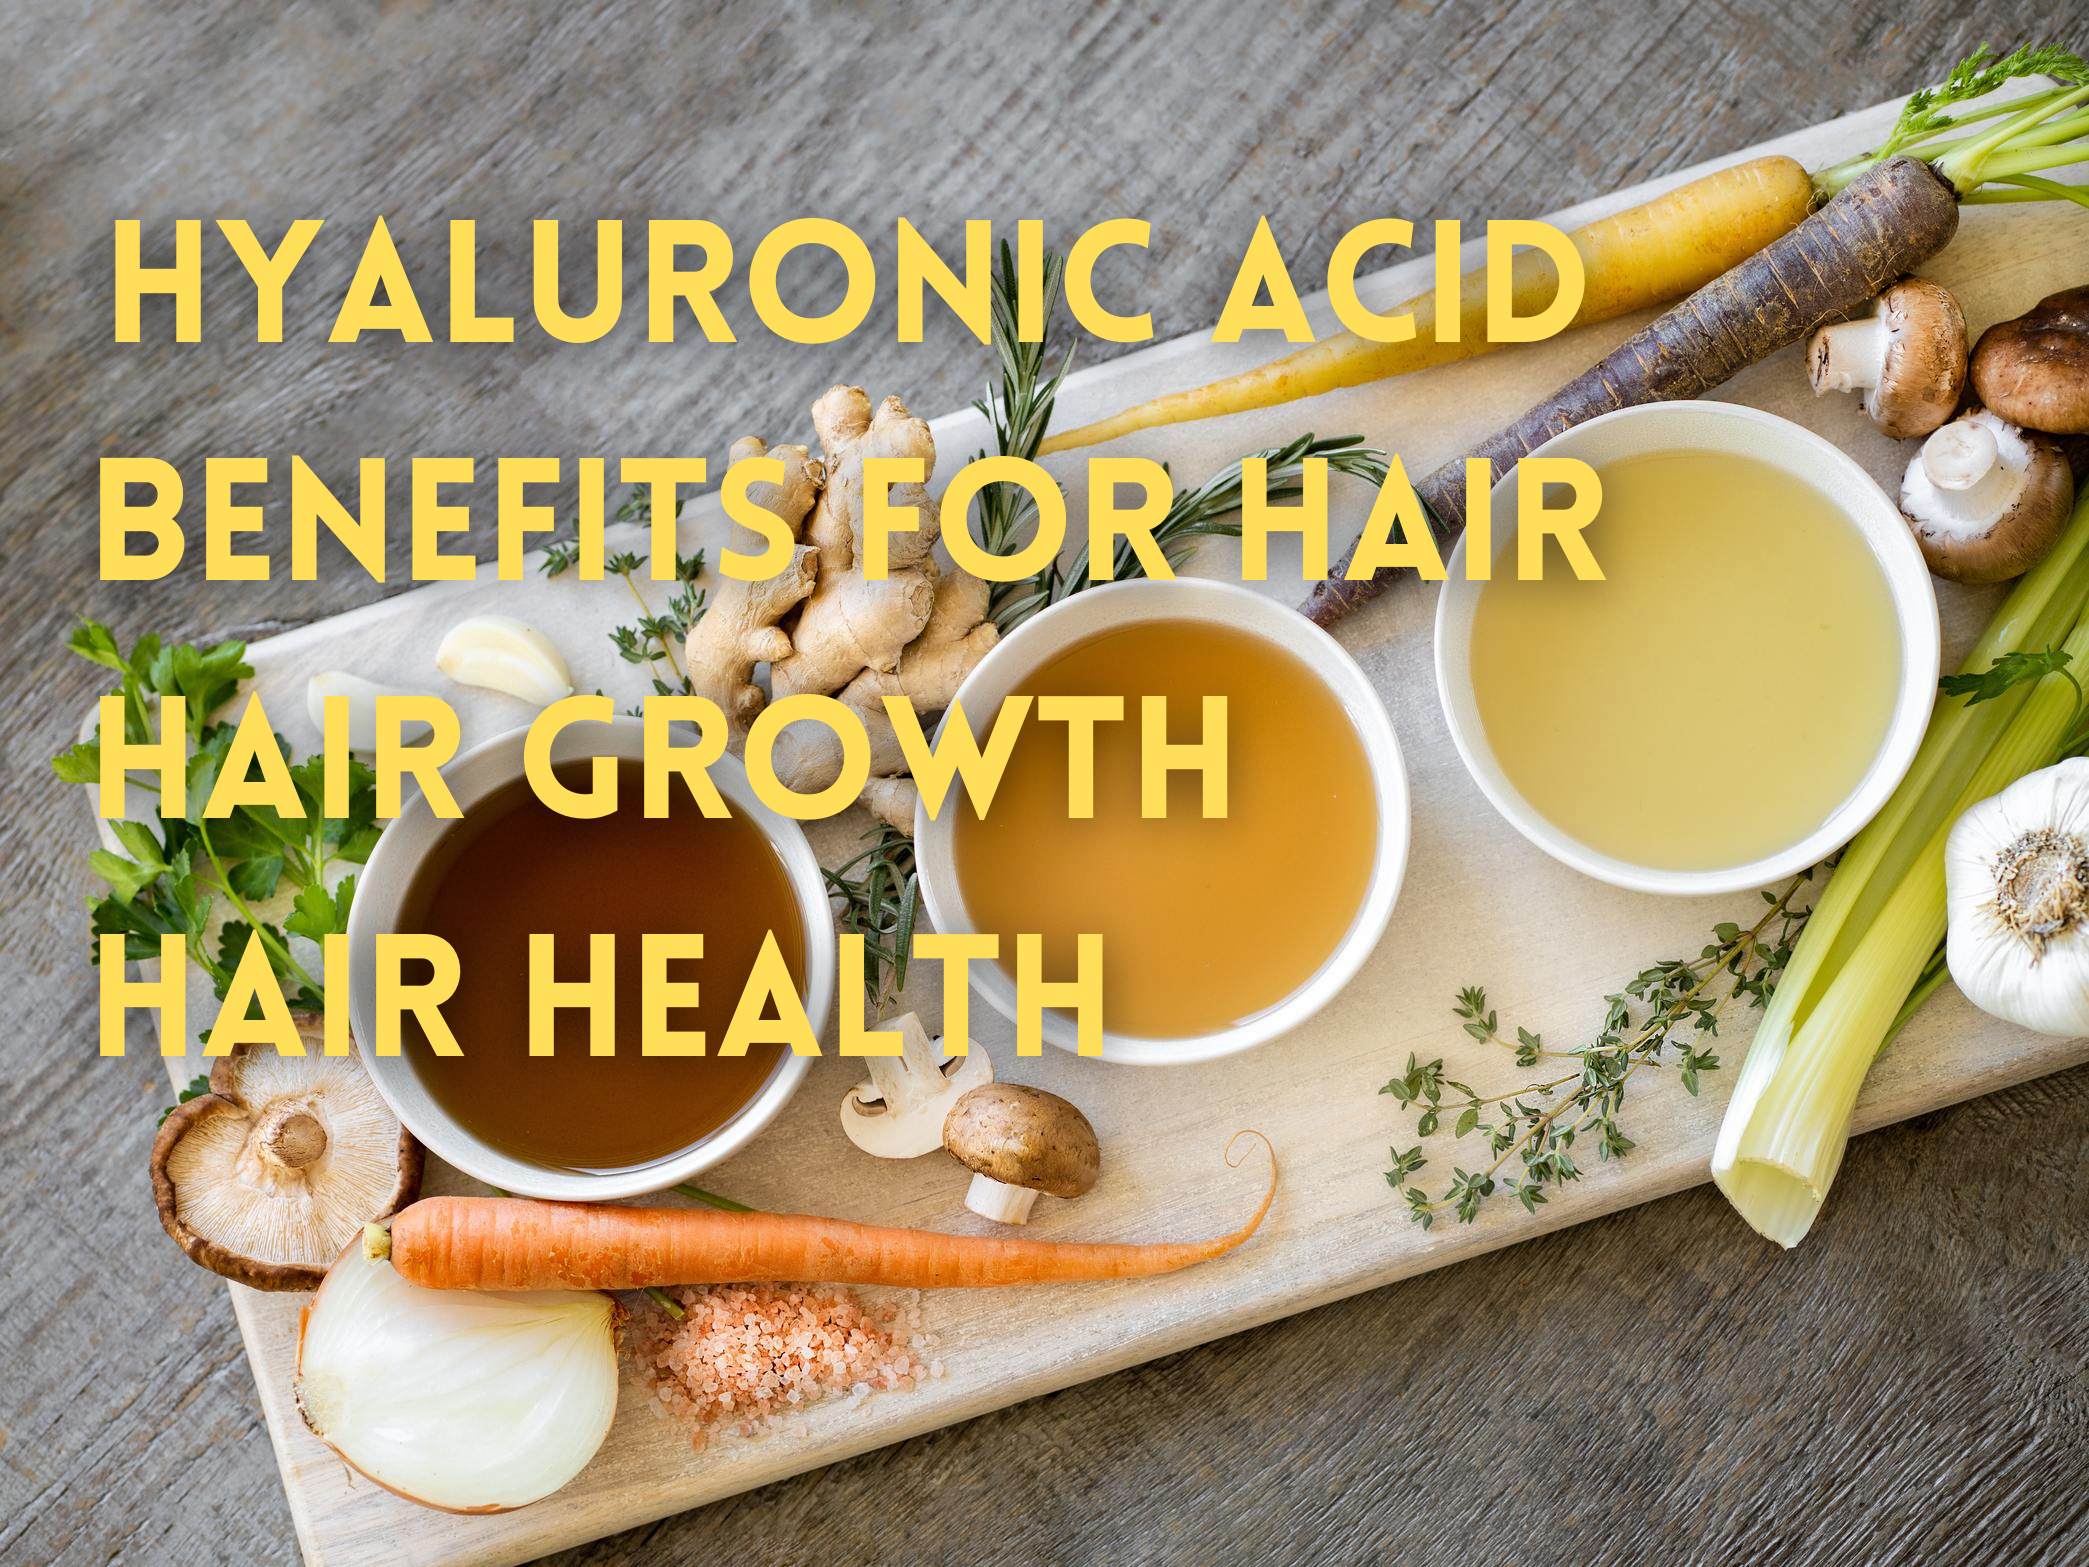 VIDEO: Hyaluronic Acid for Hair Health and Growth: Benefits and Studies